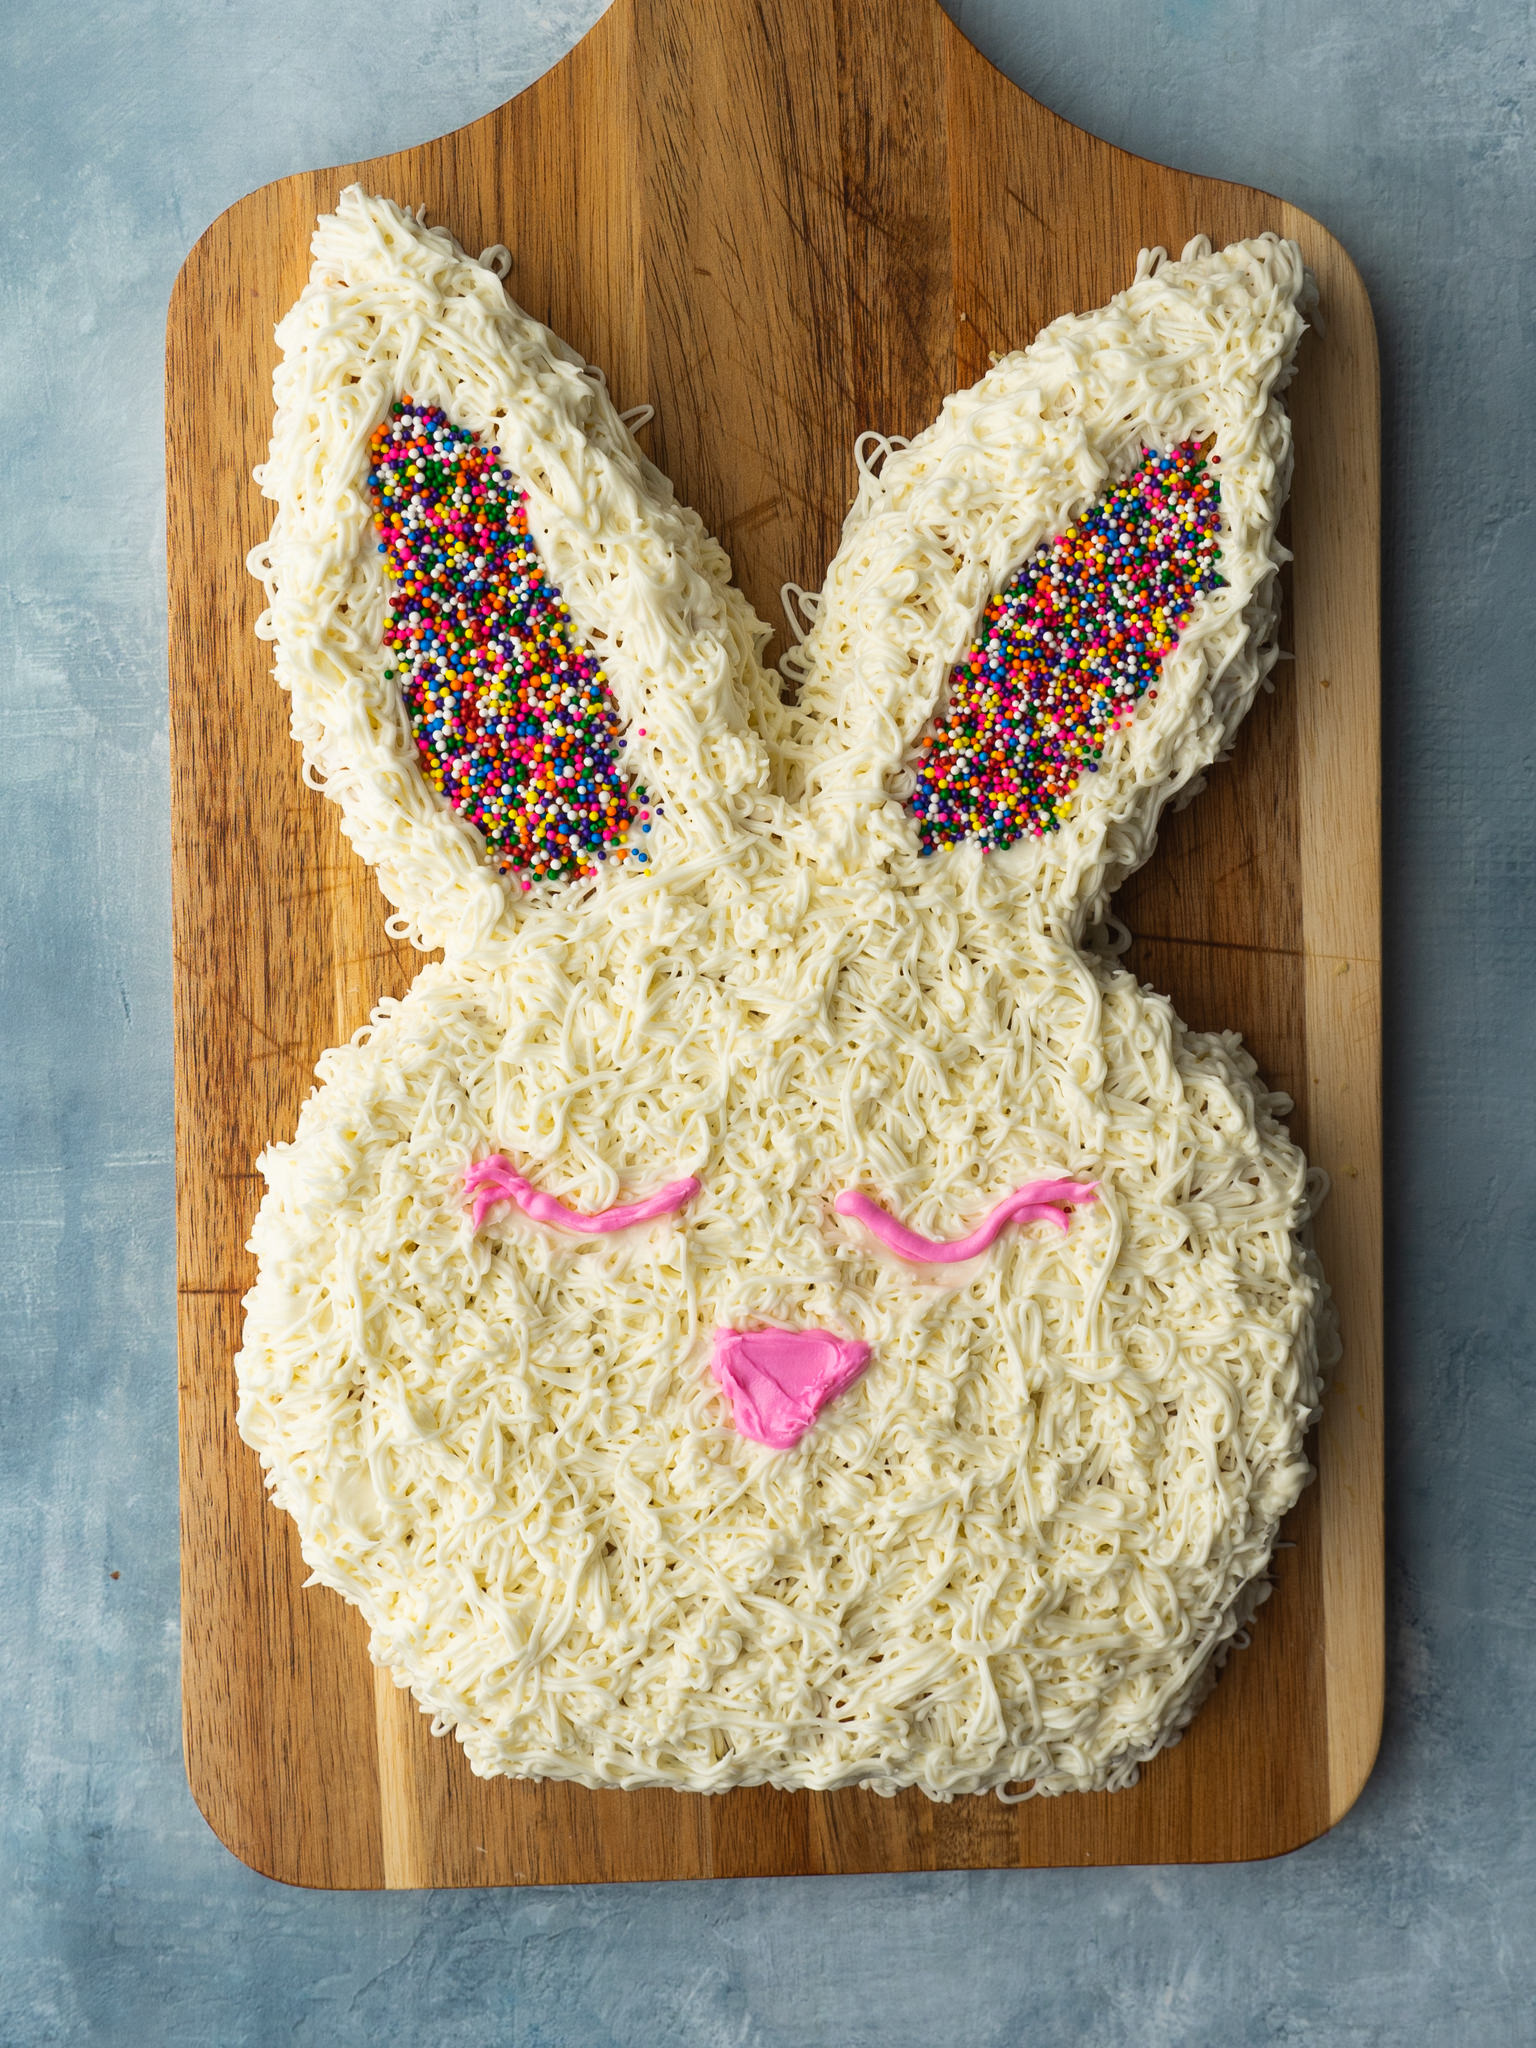 How to make an easter bunny cake